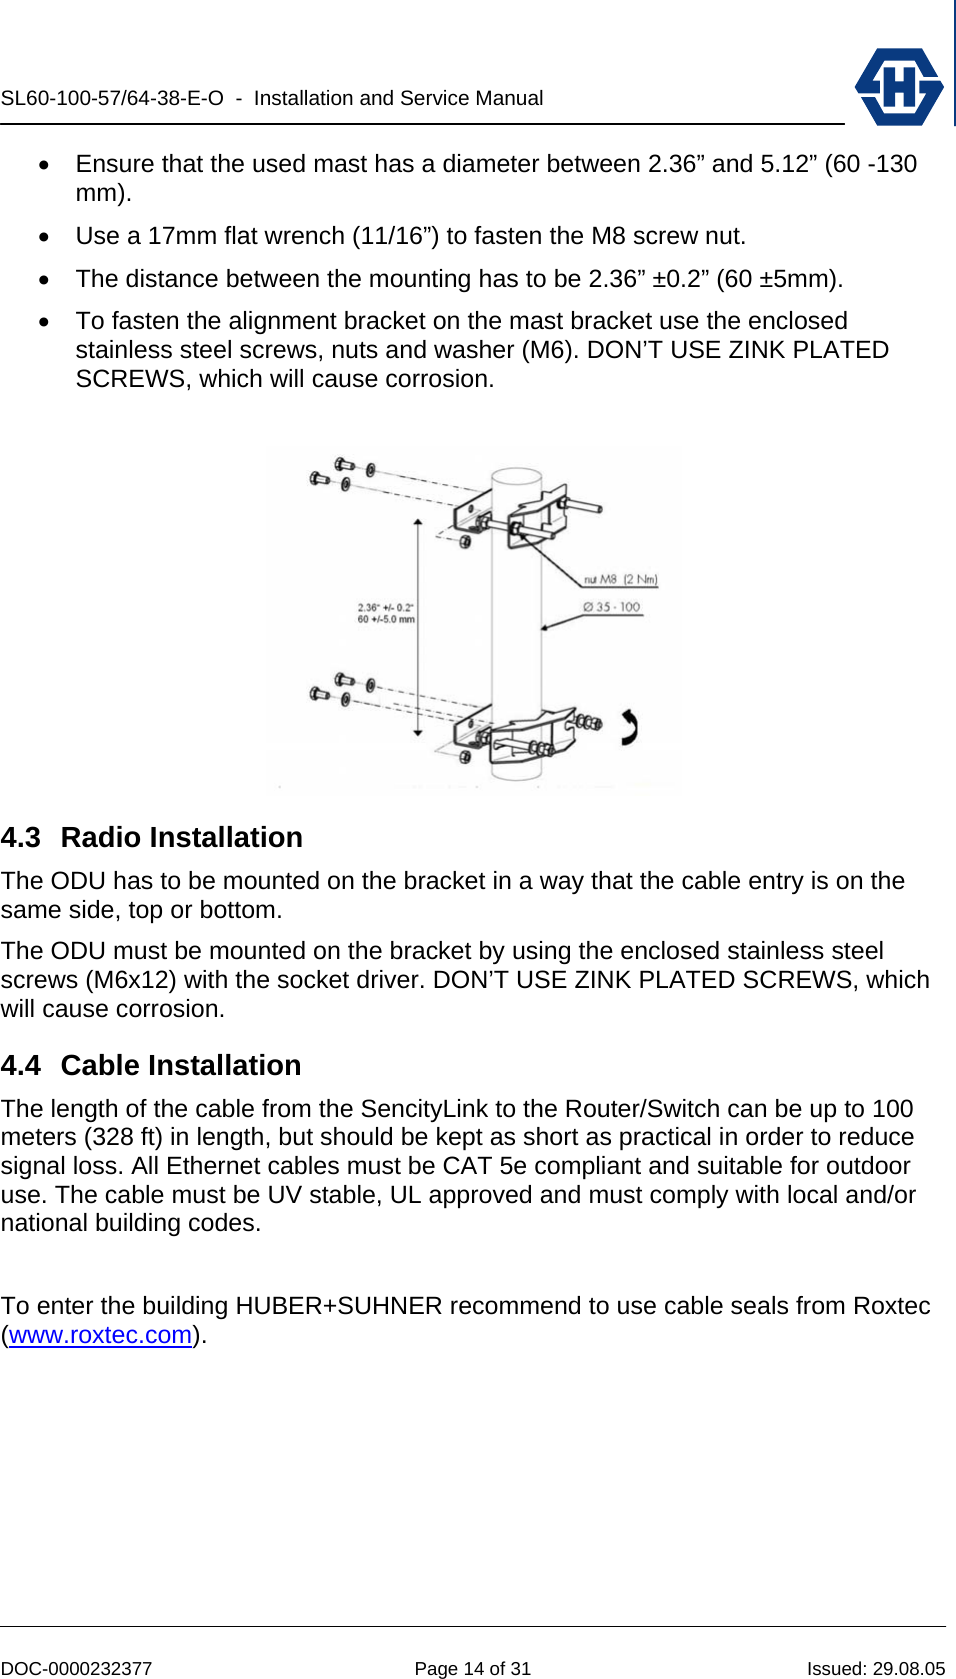 SL60-100-57/64-38-E-O  -  Installation and Service Manual   DOC-0000232377  Page 14 of 31  Issued: 29.08.05 •  Ensure that the used mast has a diameter between 2.36” and 5.12” (60 -130 mm). •  Use a 17mm flat wrench (11/16”) to fasten the M8 screw nut. •  The distance between the mounting has to be 2.36” ±0.2” (60 ±5mm). •  To fasten the alignment bracket on the mast bracket use the enclosed stainless steel screws, nuts and washer (M6). DON’T USE ZINK PLATED SCREWS, which will cause corrosion.   4.3 Radio Installation The ODU has to be mounted on the bracket in a way that the cable entry is on the same side, top or bottom.  The ODU must be mounted on the bracket by using the enclosed stainless steel screws (M6x12) with the socket driver. DON’T USE ZINK PLATED SCREWS, which will cause corrosion. 4.4 Cable Installation The length of the cable from the SencityLink to the Router/Switch can be up to 100 meters (328 ft) in length, but should be kept as short as practical in order to reduce signal loss. All Ethernet cables must be CAT 5e compliant and suitable for outdoor use. The cable must be UV stable, UL approved and must comply with local and/or national building codes.  To enter the building HUBER+SUHNER recommend to use cable seals from Roxtec (www.roxtec.com).  